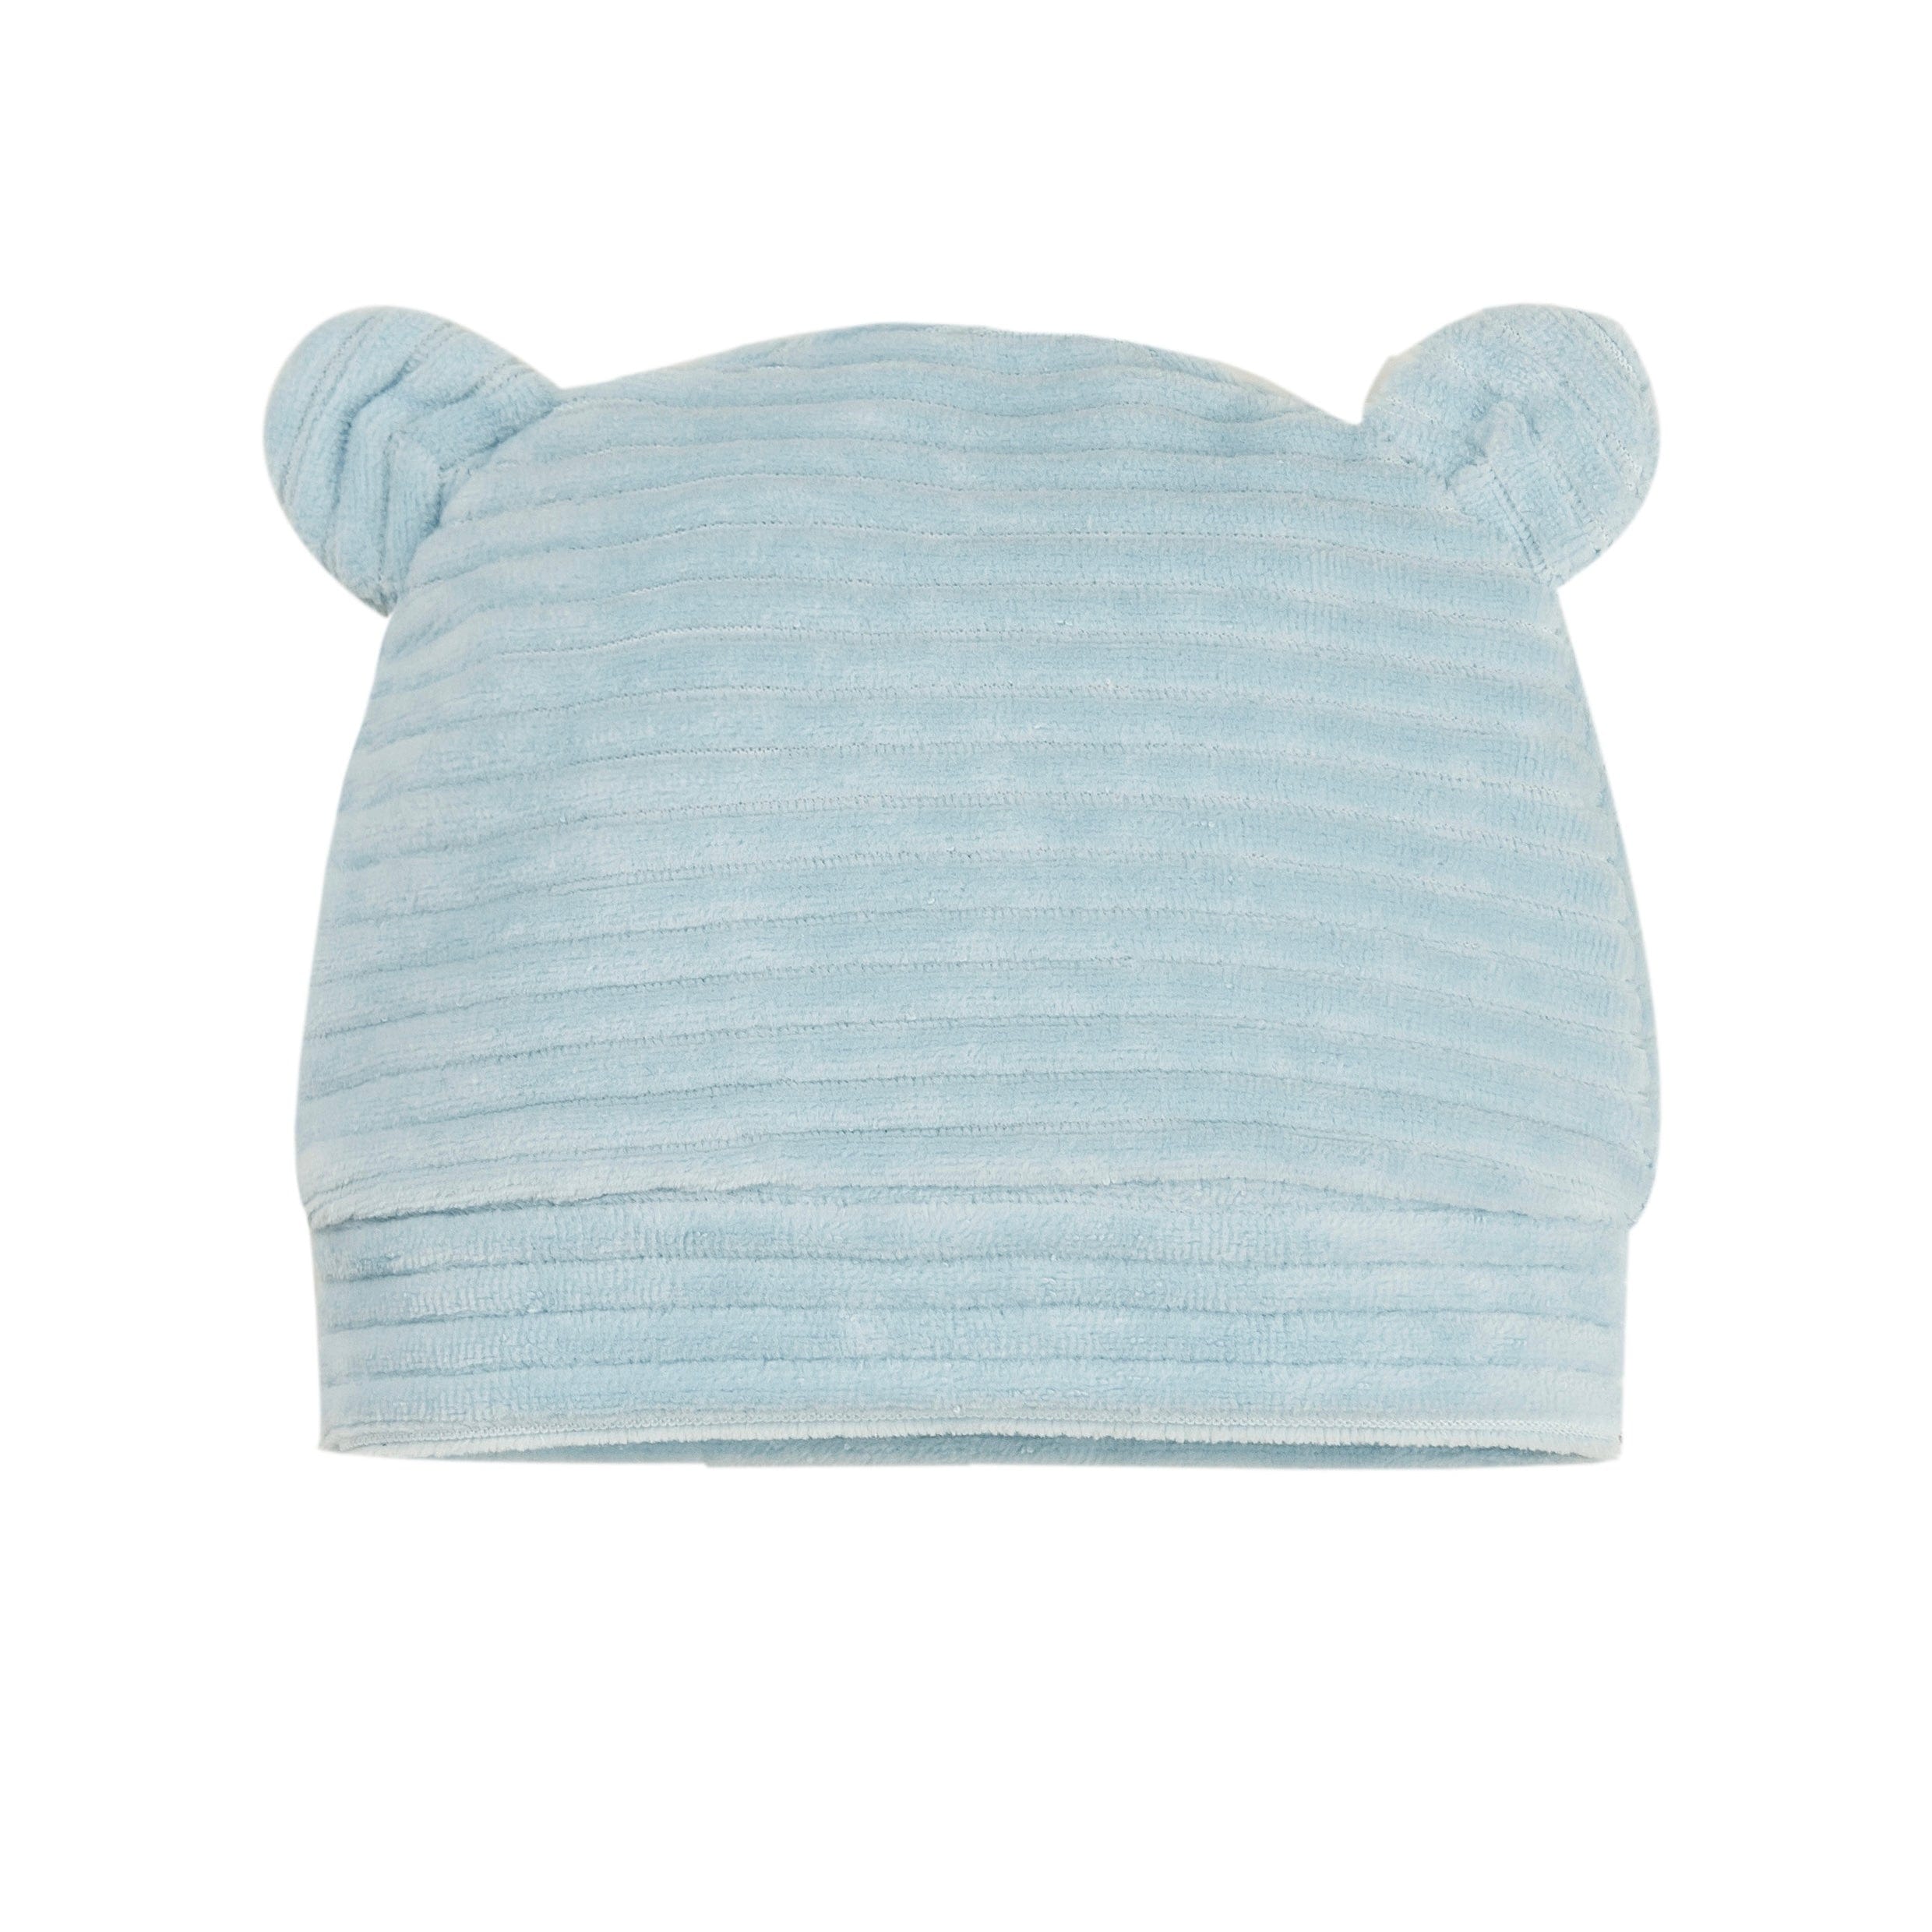 EVERYTHING MUST CHANGE -Bear Hat - Blue